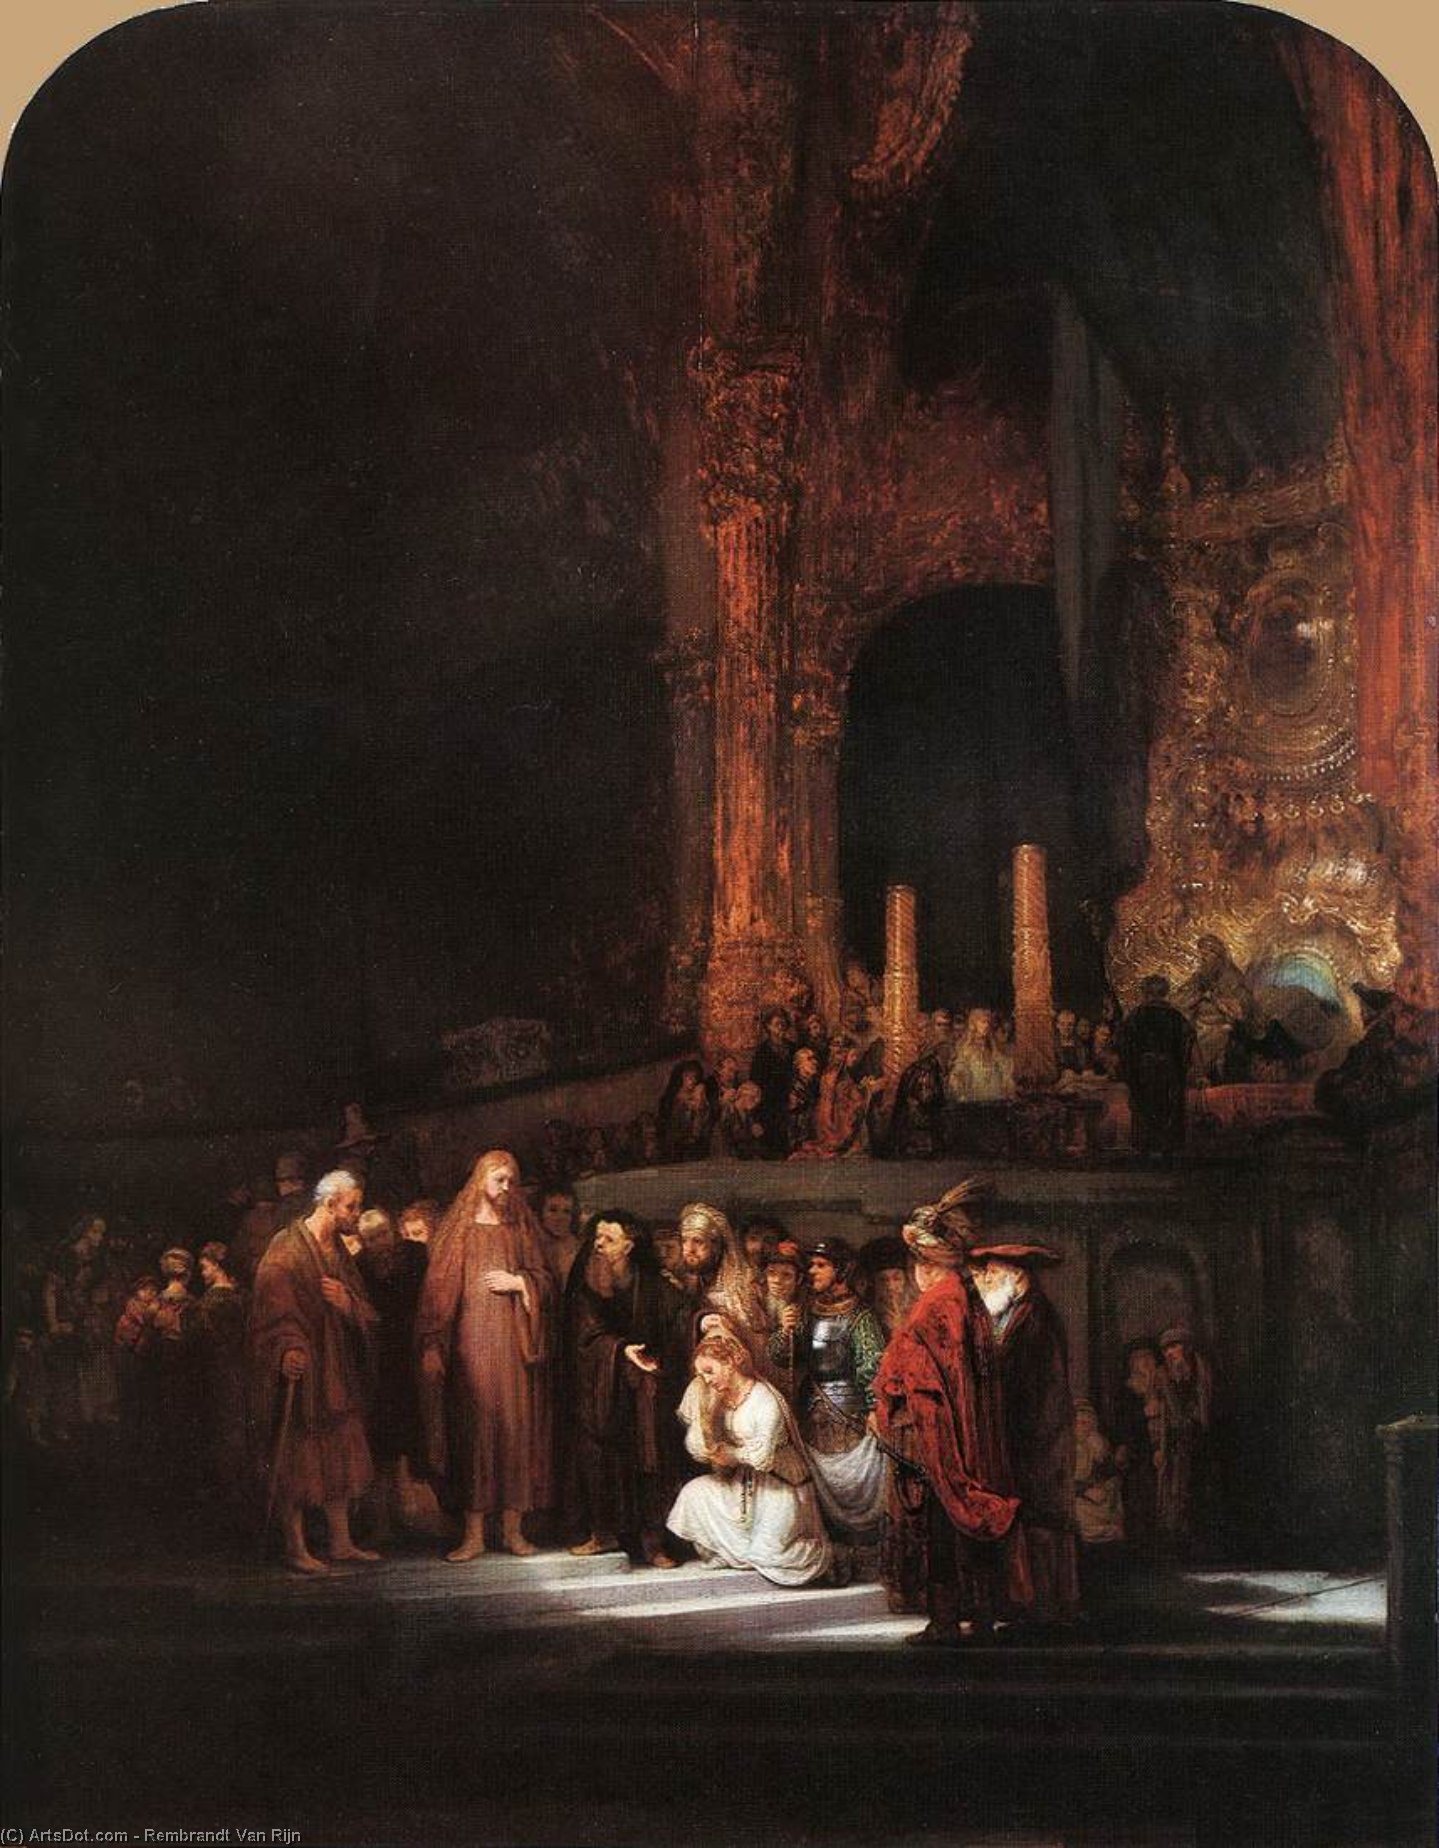 WikiOO.org - 백과 사전 - 회화, 삽화 Rembrandt Van Rijn - Christ and the Woman Taken in Adultery